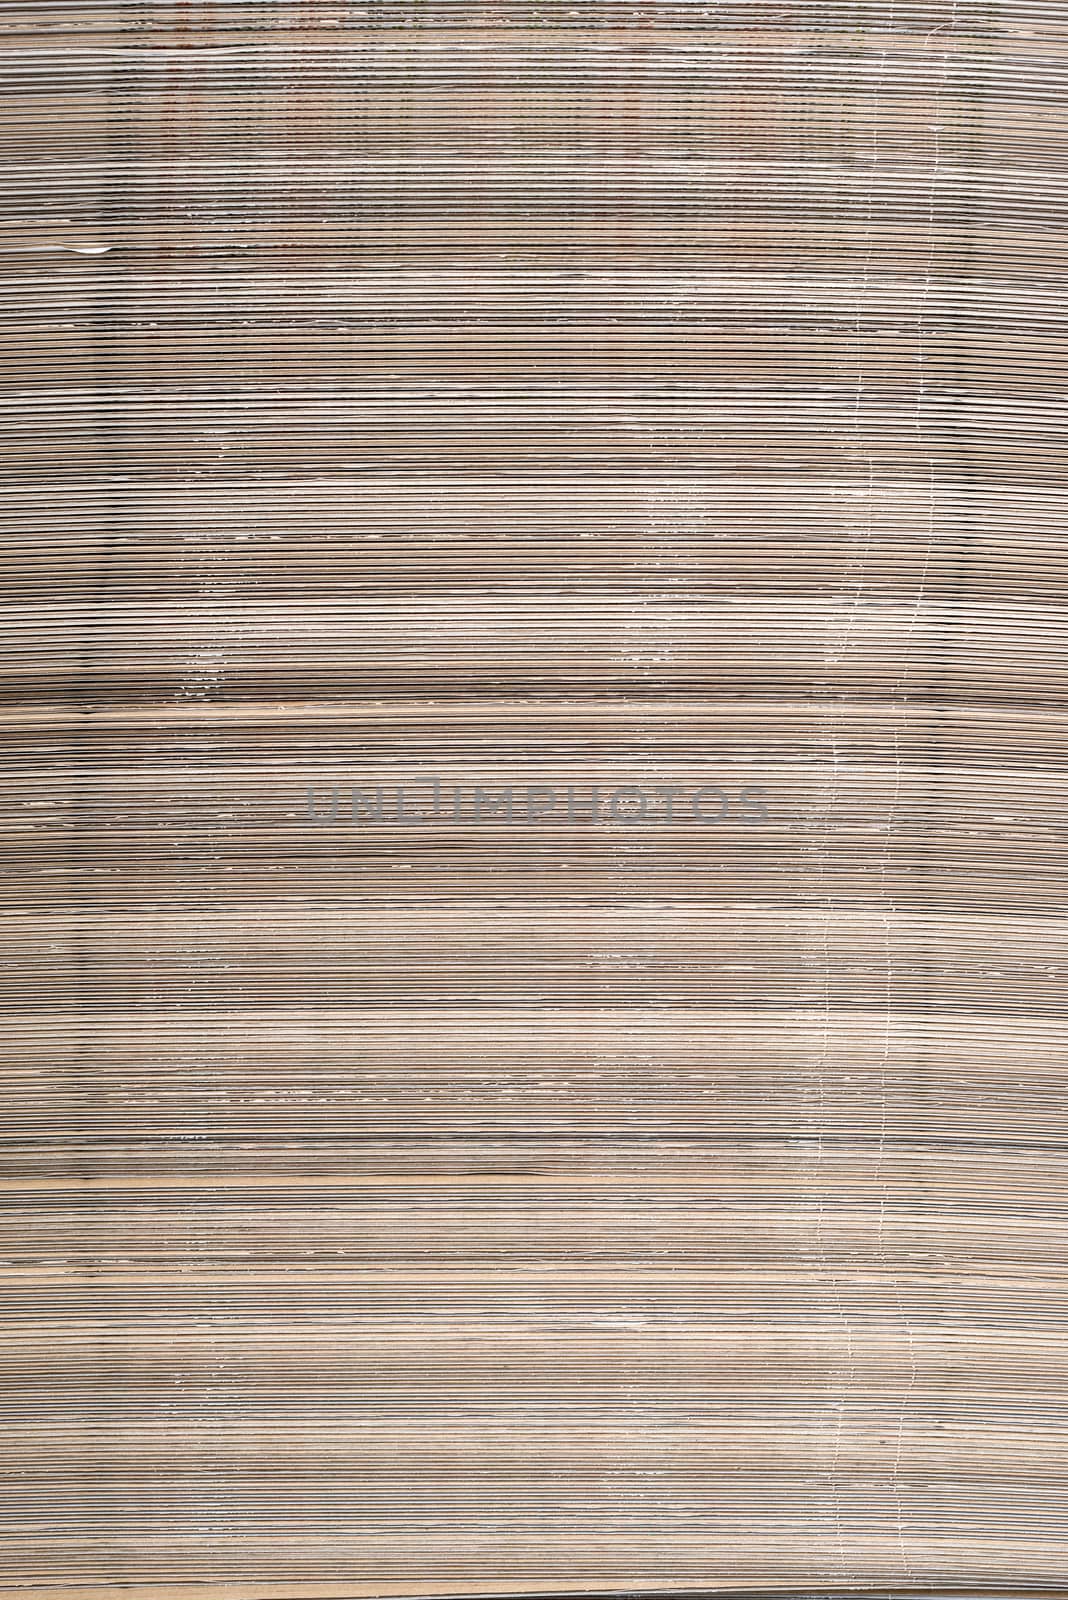 Stack of corrugated cardboard in a large pile by DNKSTUDIO